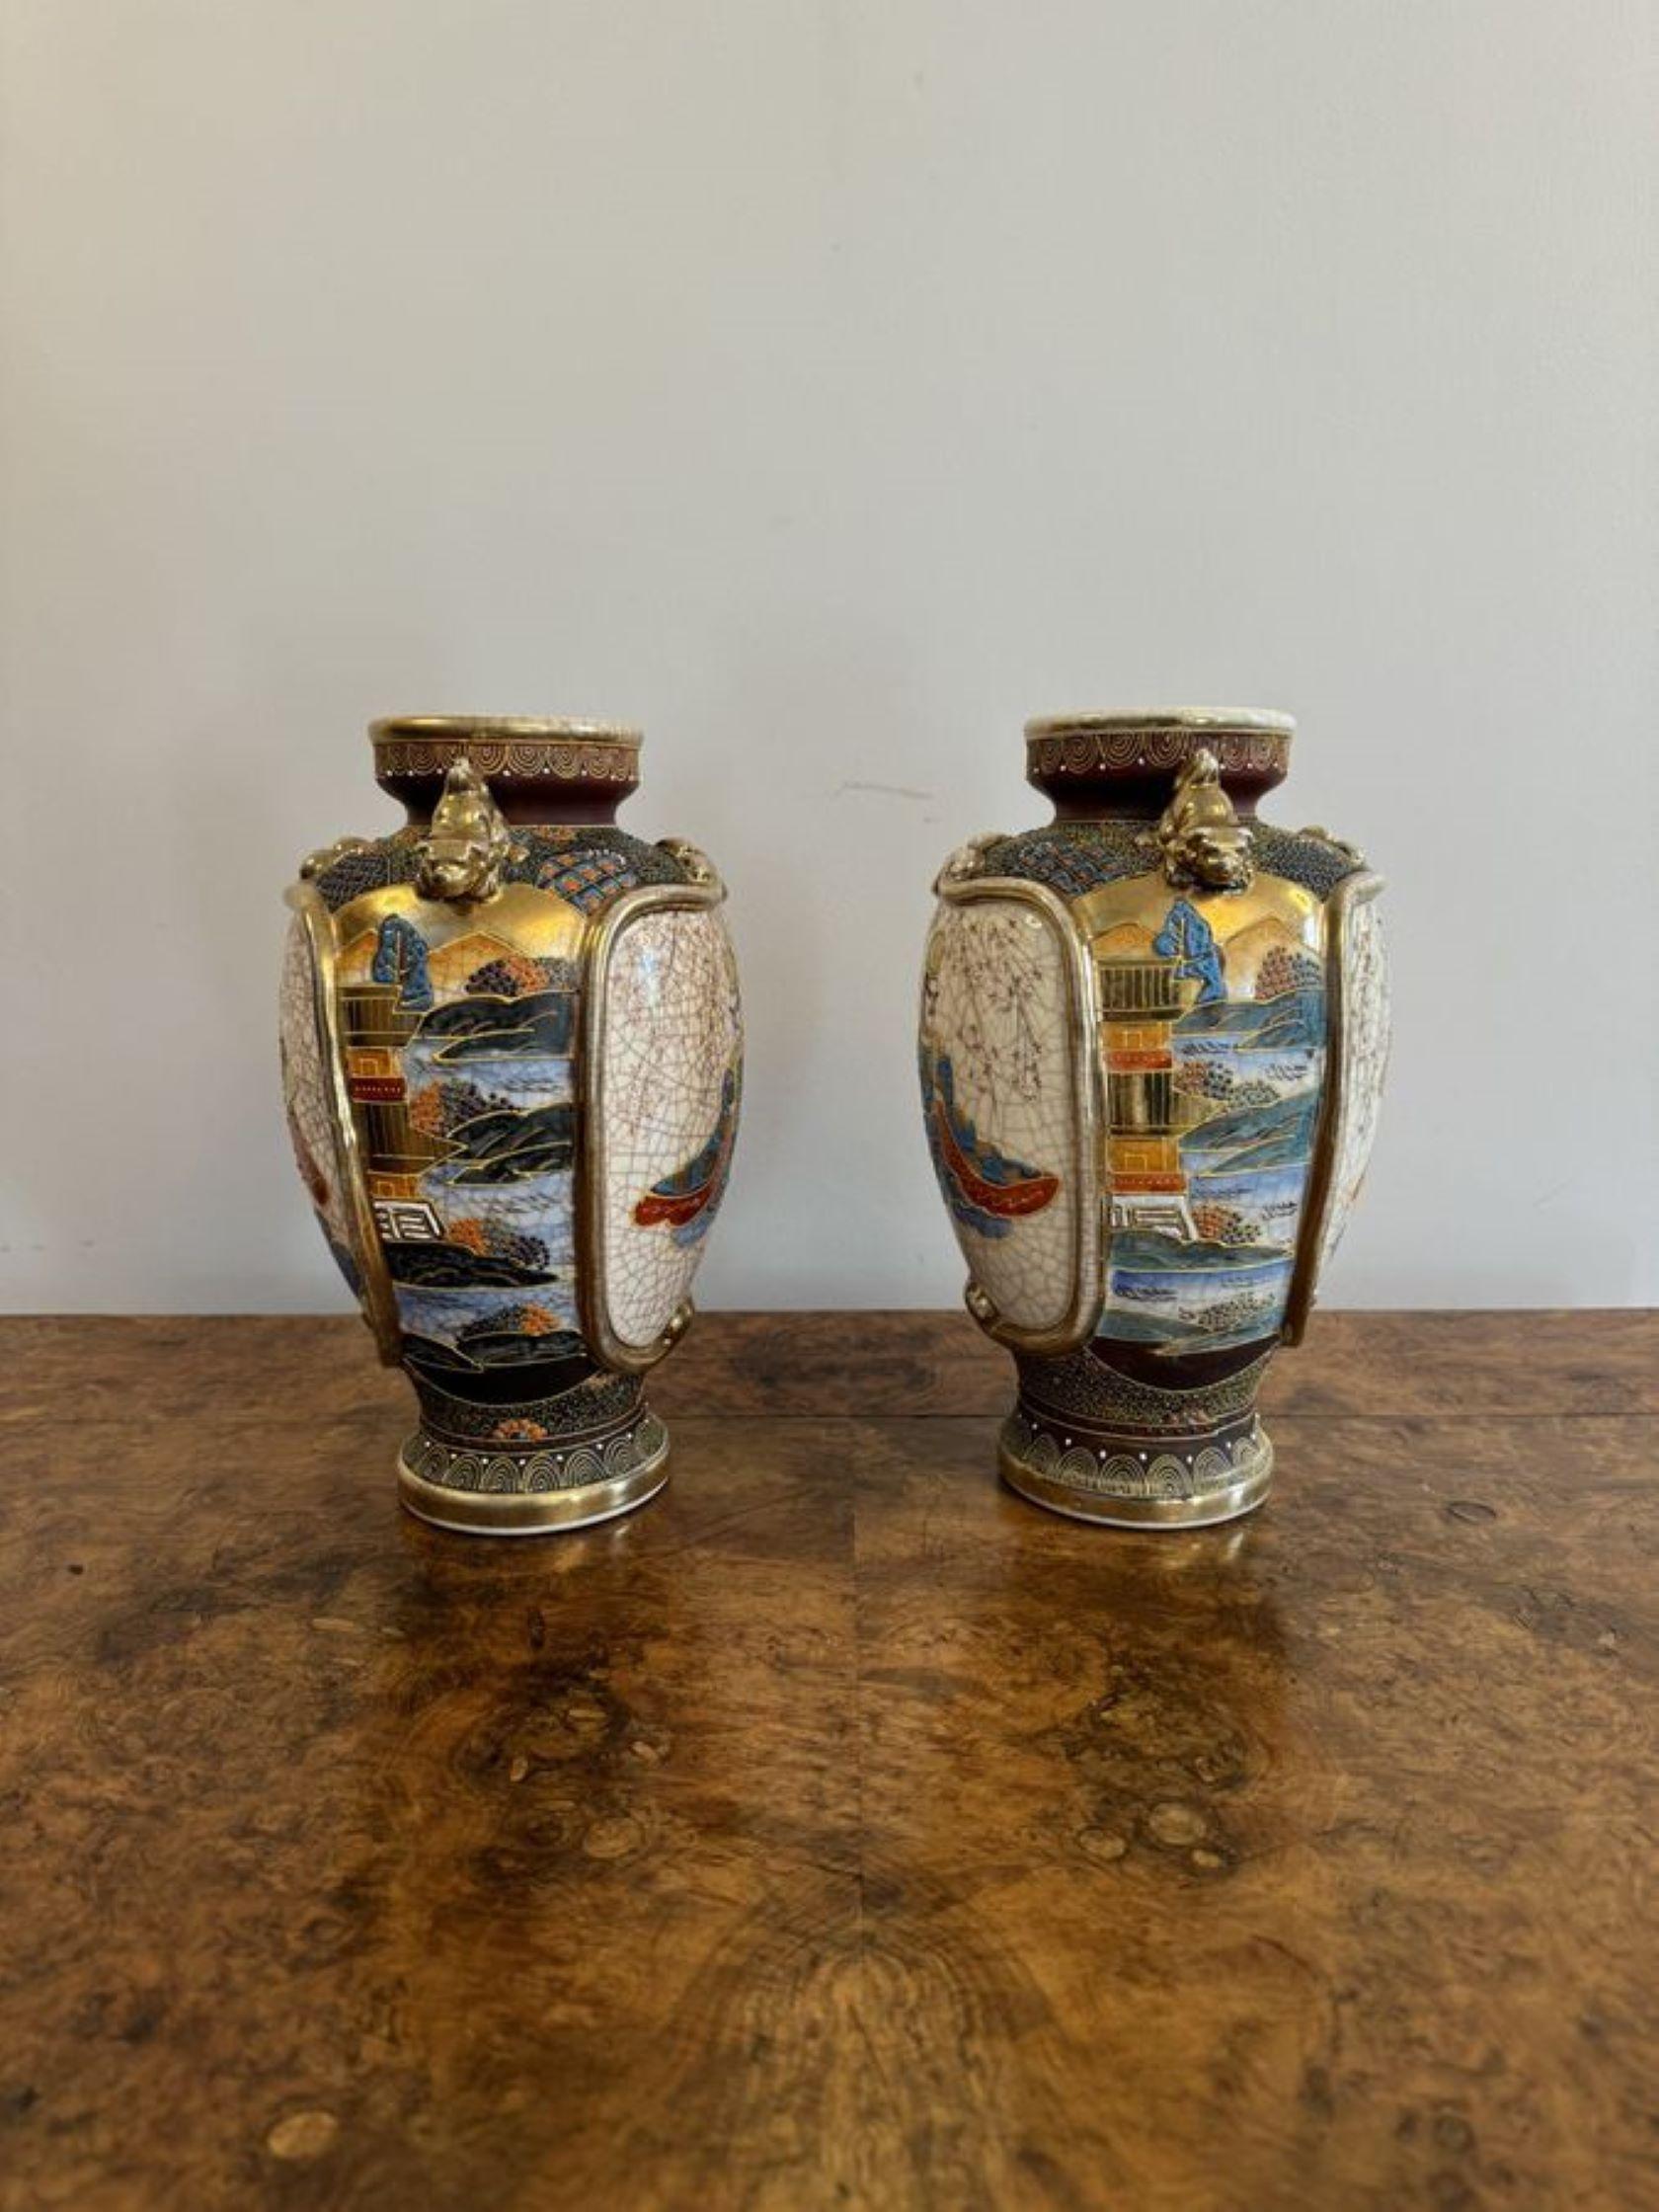 Unusual pair of antique 19th century quality Japanese satsuma vases, having unusual hand painted panels in wonderful blue, red, brown and gold colours, with dog of fo handles to the sides, raised on circular shaped bases.

D. 1880